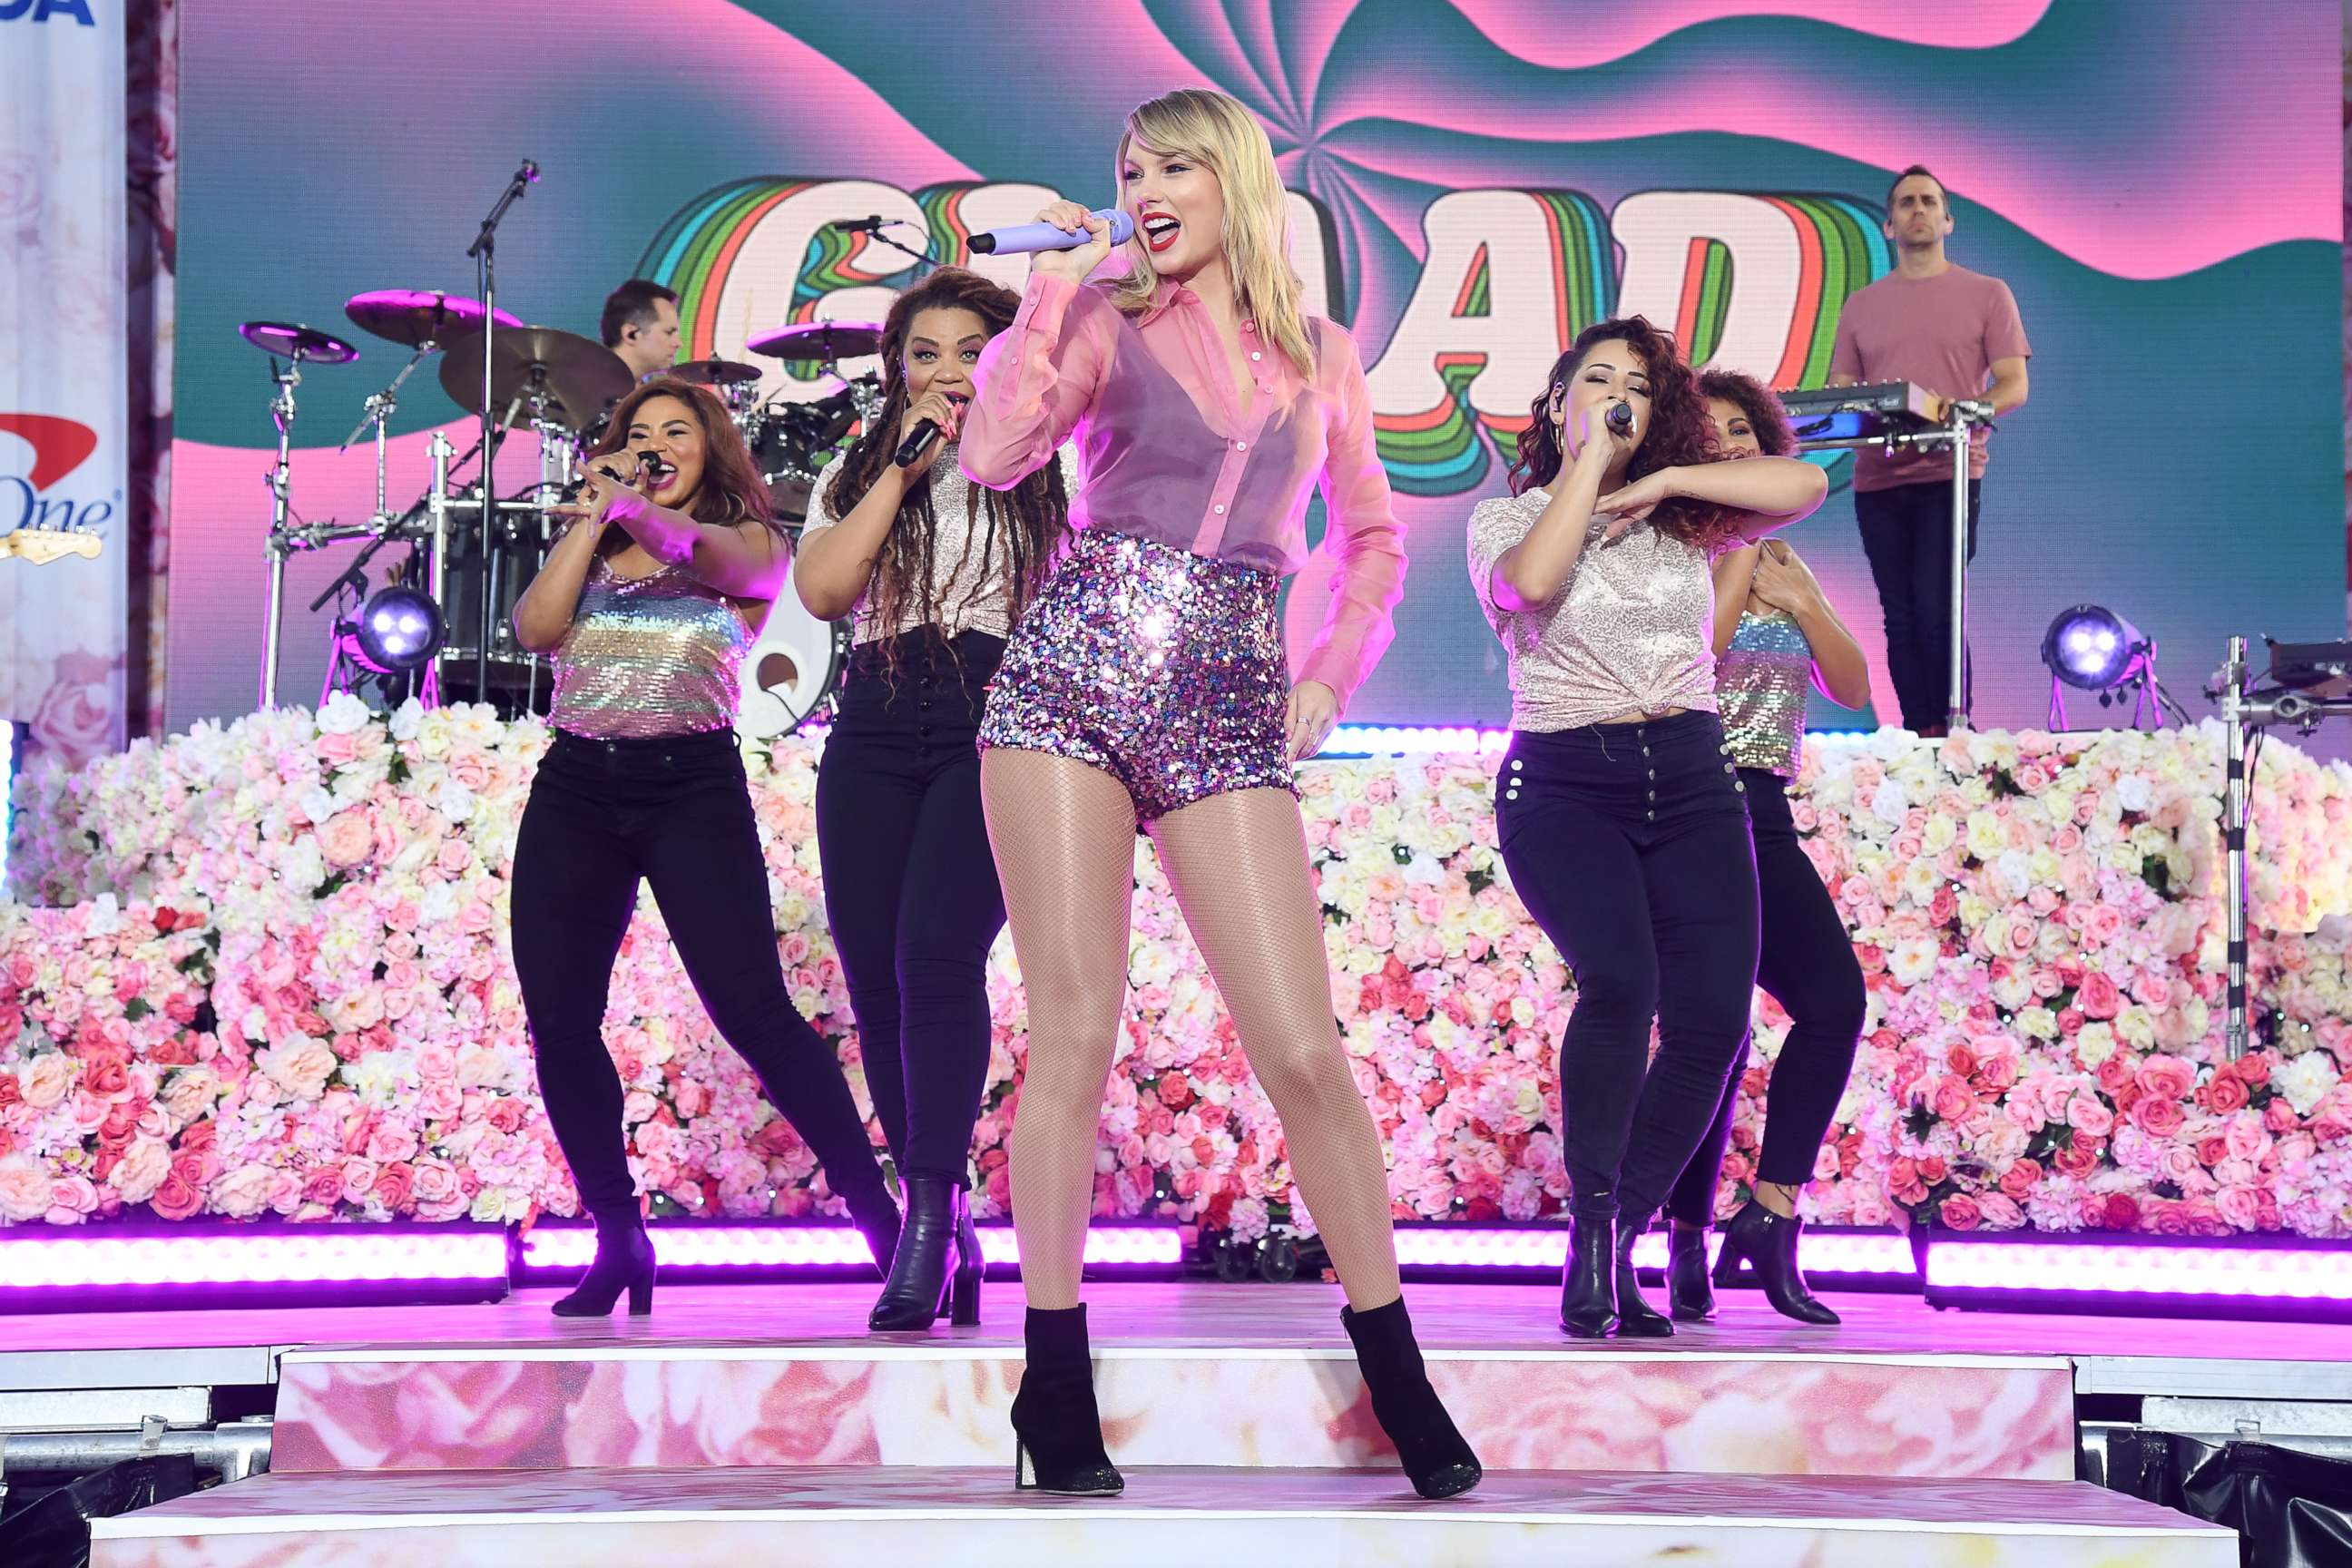 PHOTO: NEW YORK, NEW YORK - AUGUST 22: Taylor Swift performs on ABC's "Good Morning America" at SummerStage at Rumsey Playfield, Central Park on August 22, 2019 in New York City. (Photo by Kevin Mazur/Getty Images for ABA)